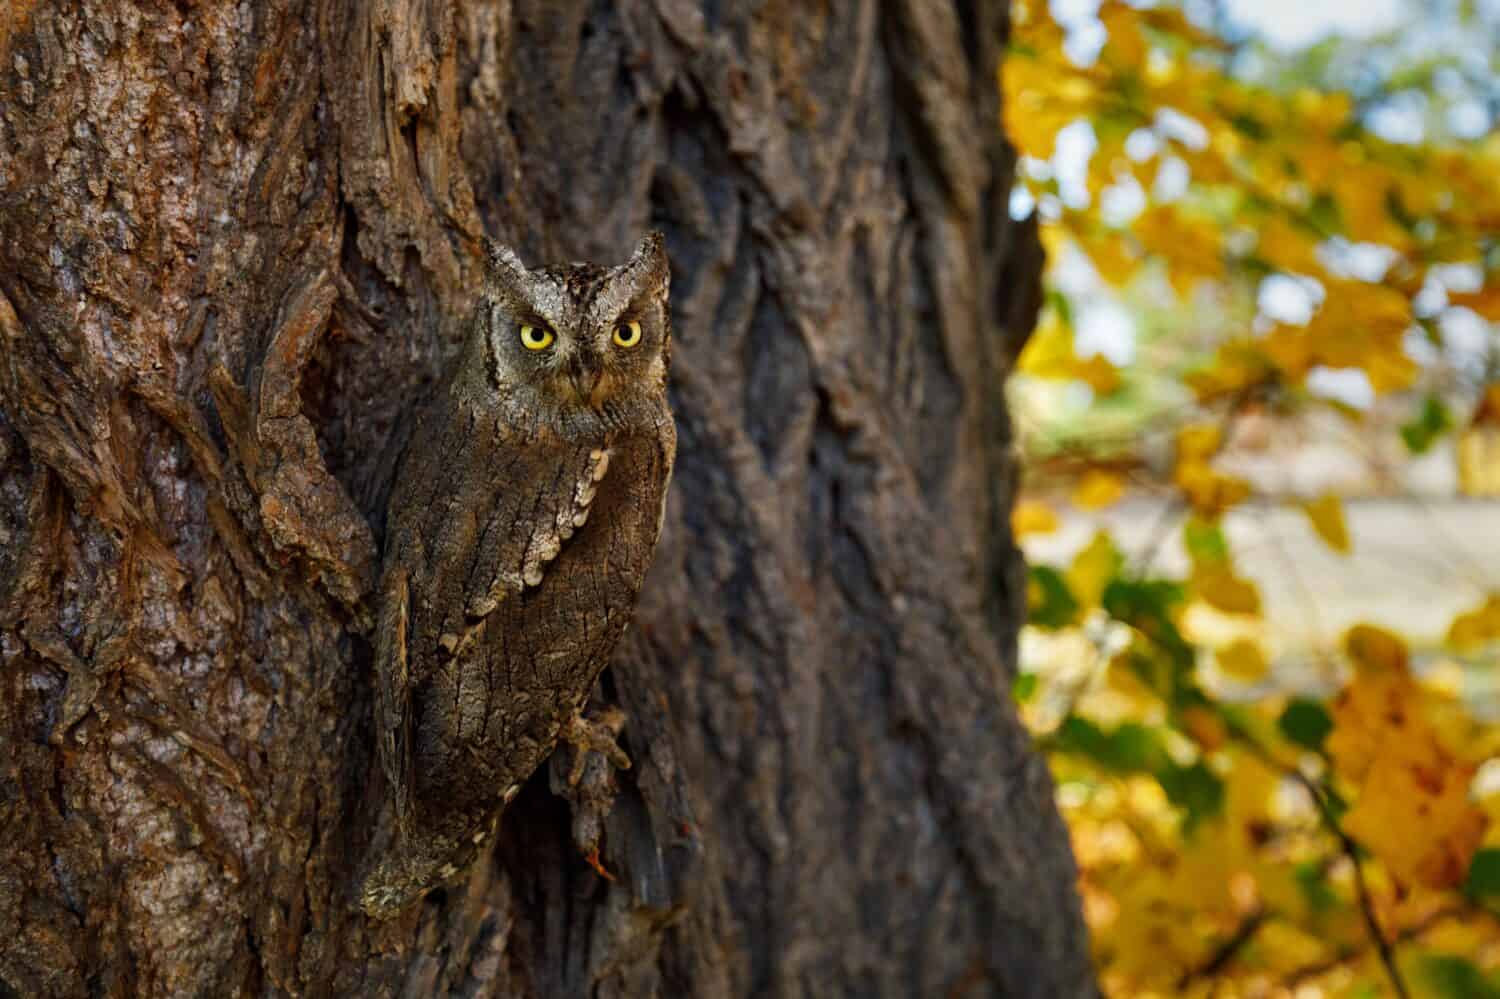 Owl's camouflage. European scops owl, Otus scops, masked on tree cortex in autumn forest. Small owl peeks out from trunk showing yellow eyes. Bird also known as Eurasian scops owl. Wildlife scene.